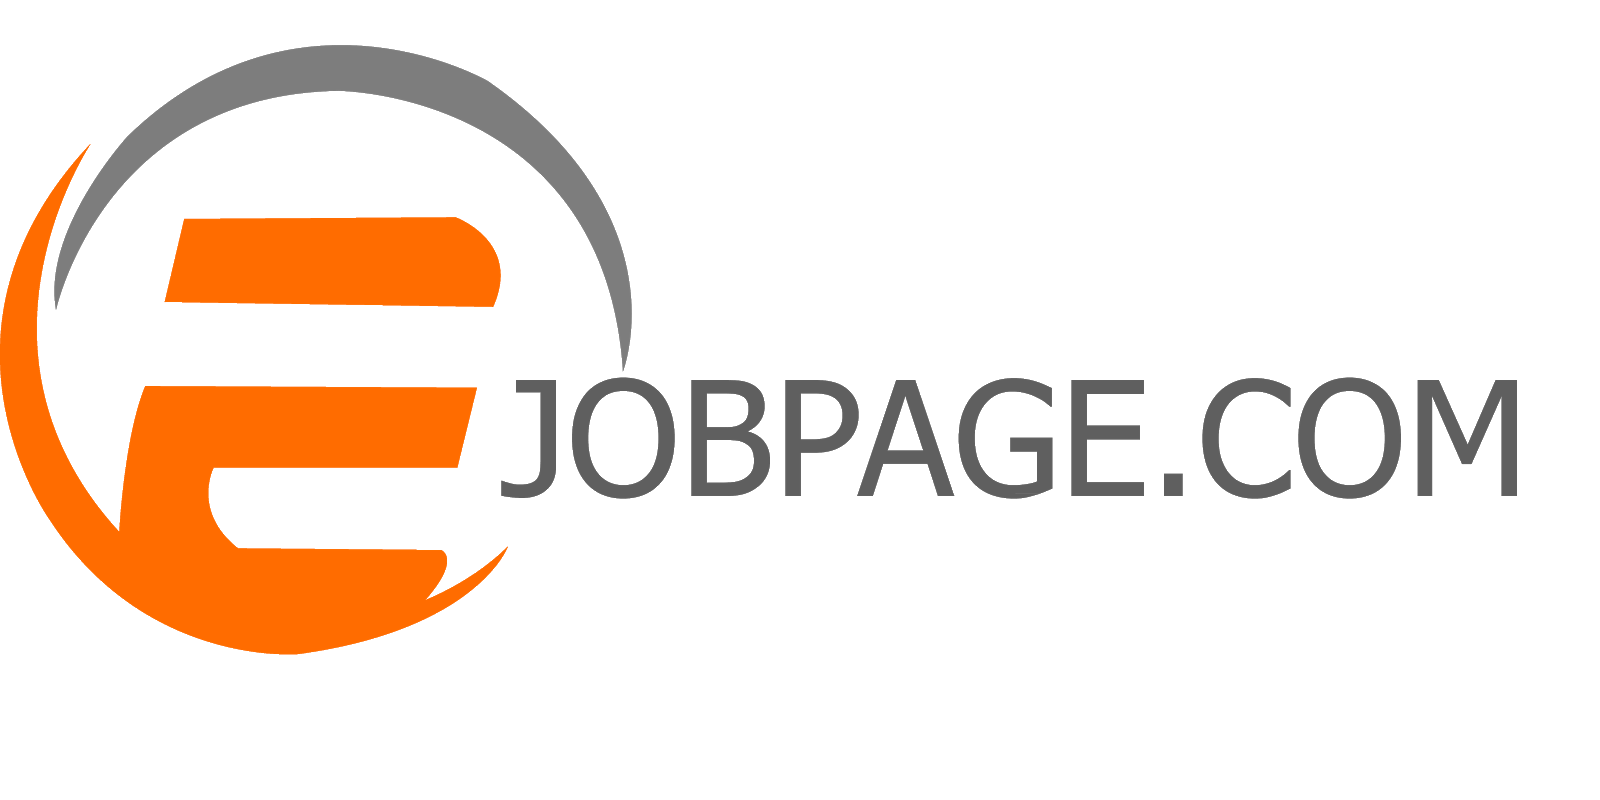 Ejobpage